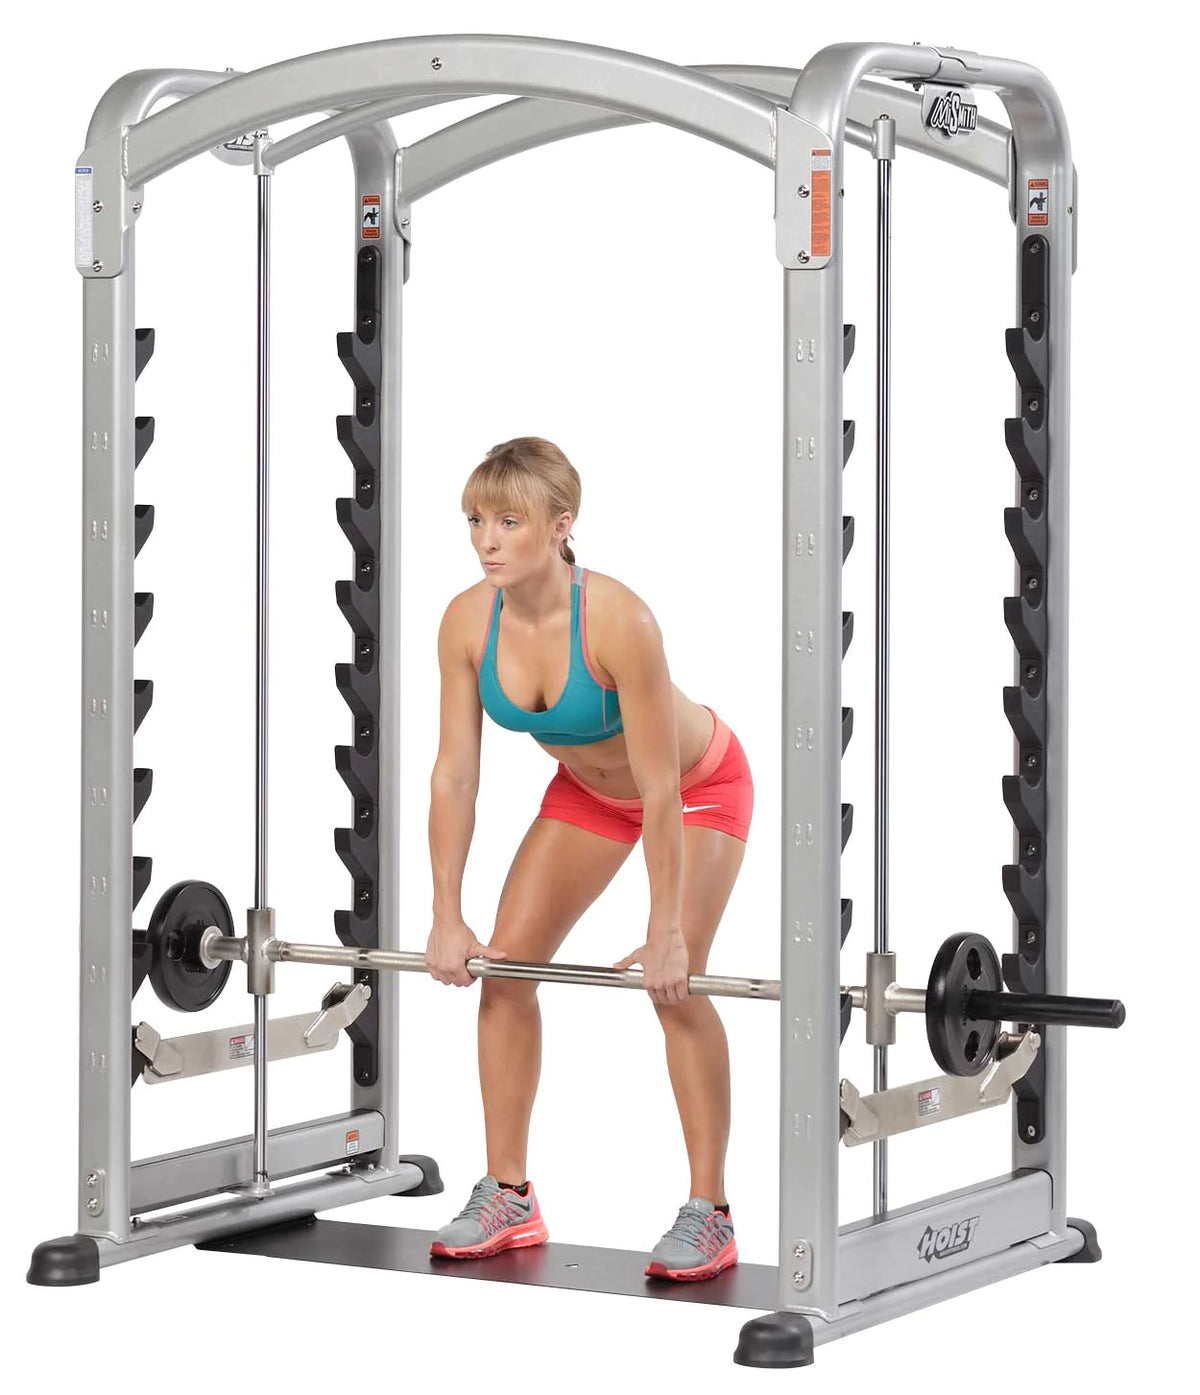 Hoist Fitness MiSmith Dual Action Smith view in use | Fitness Experience